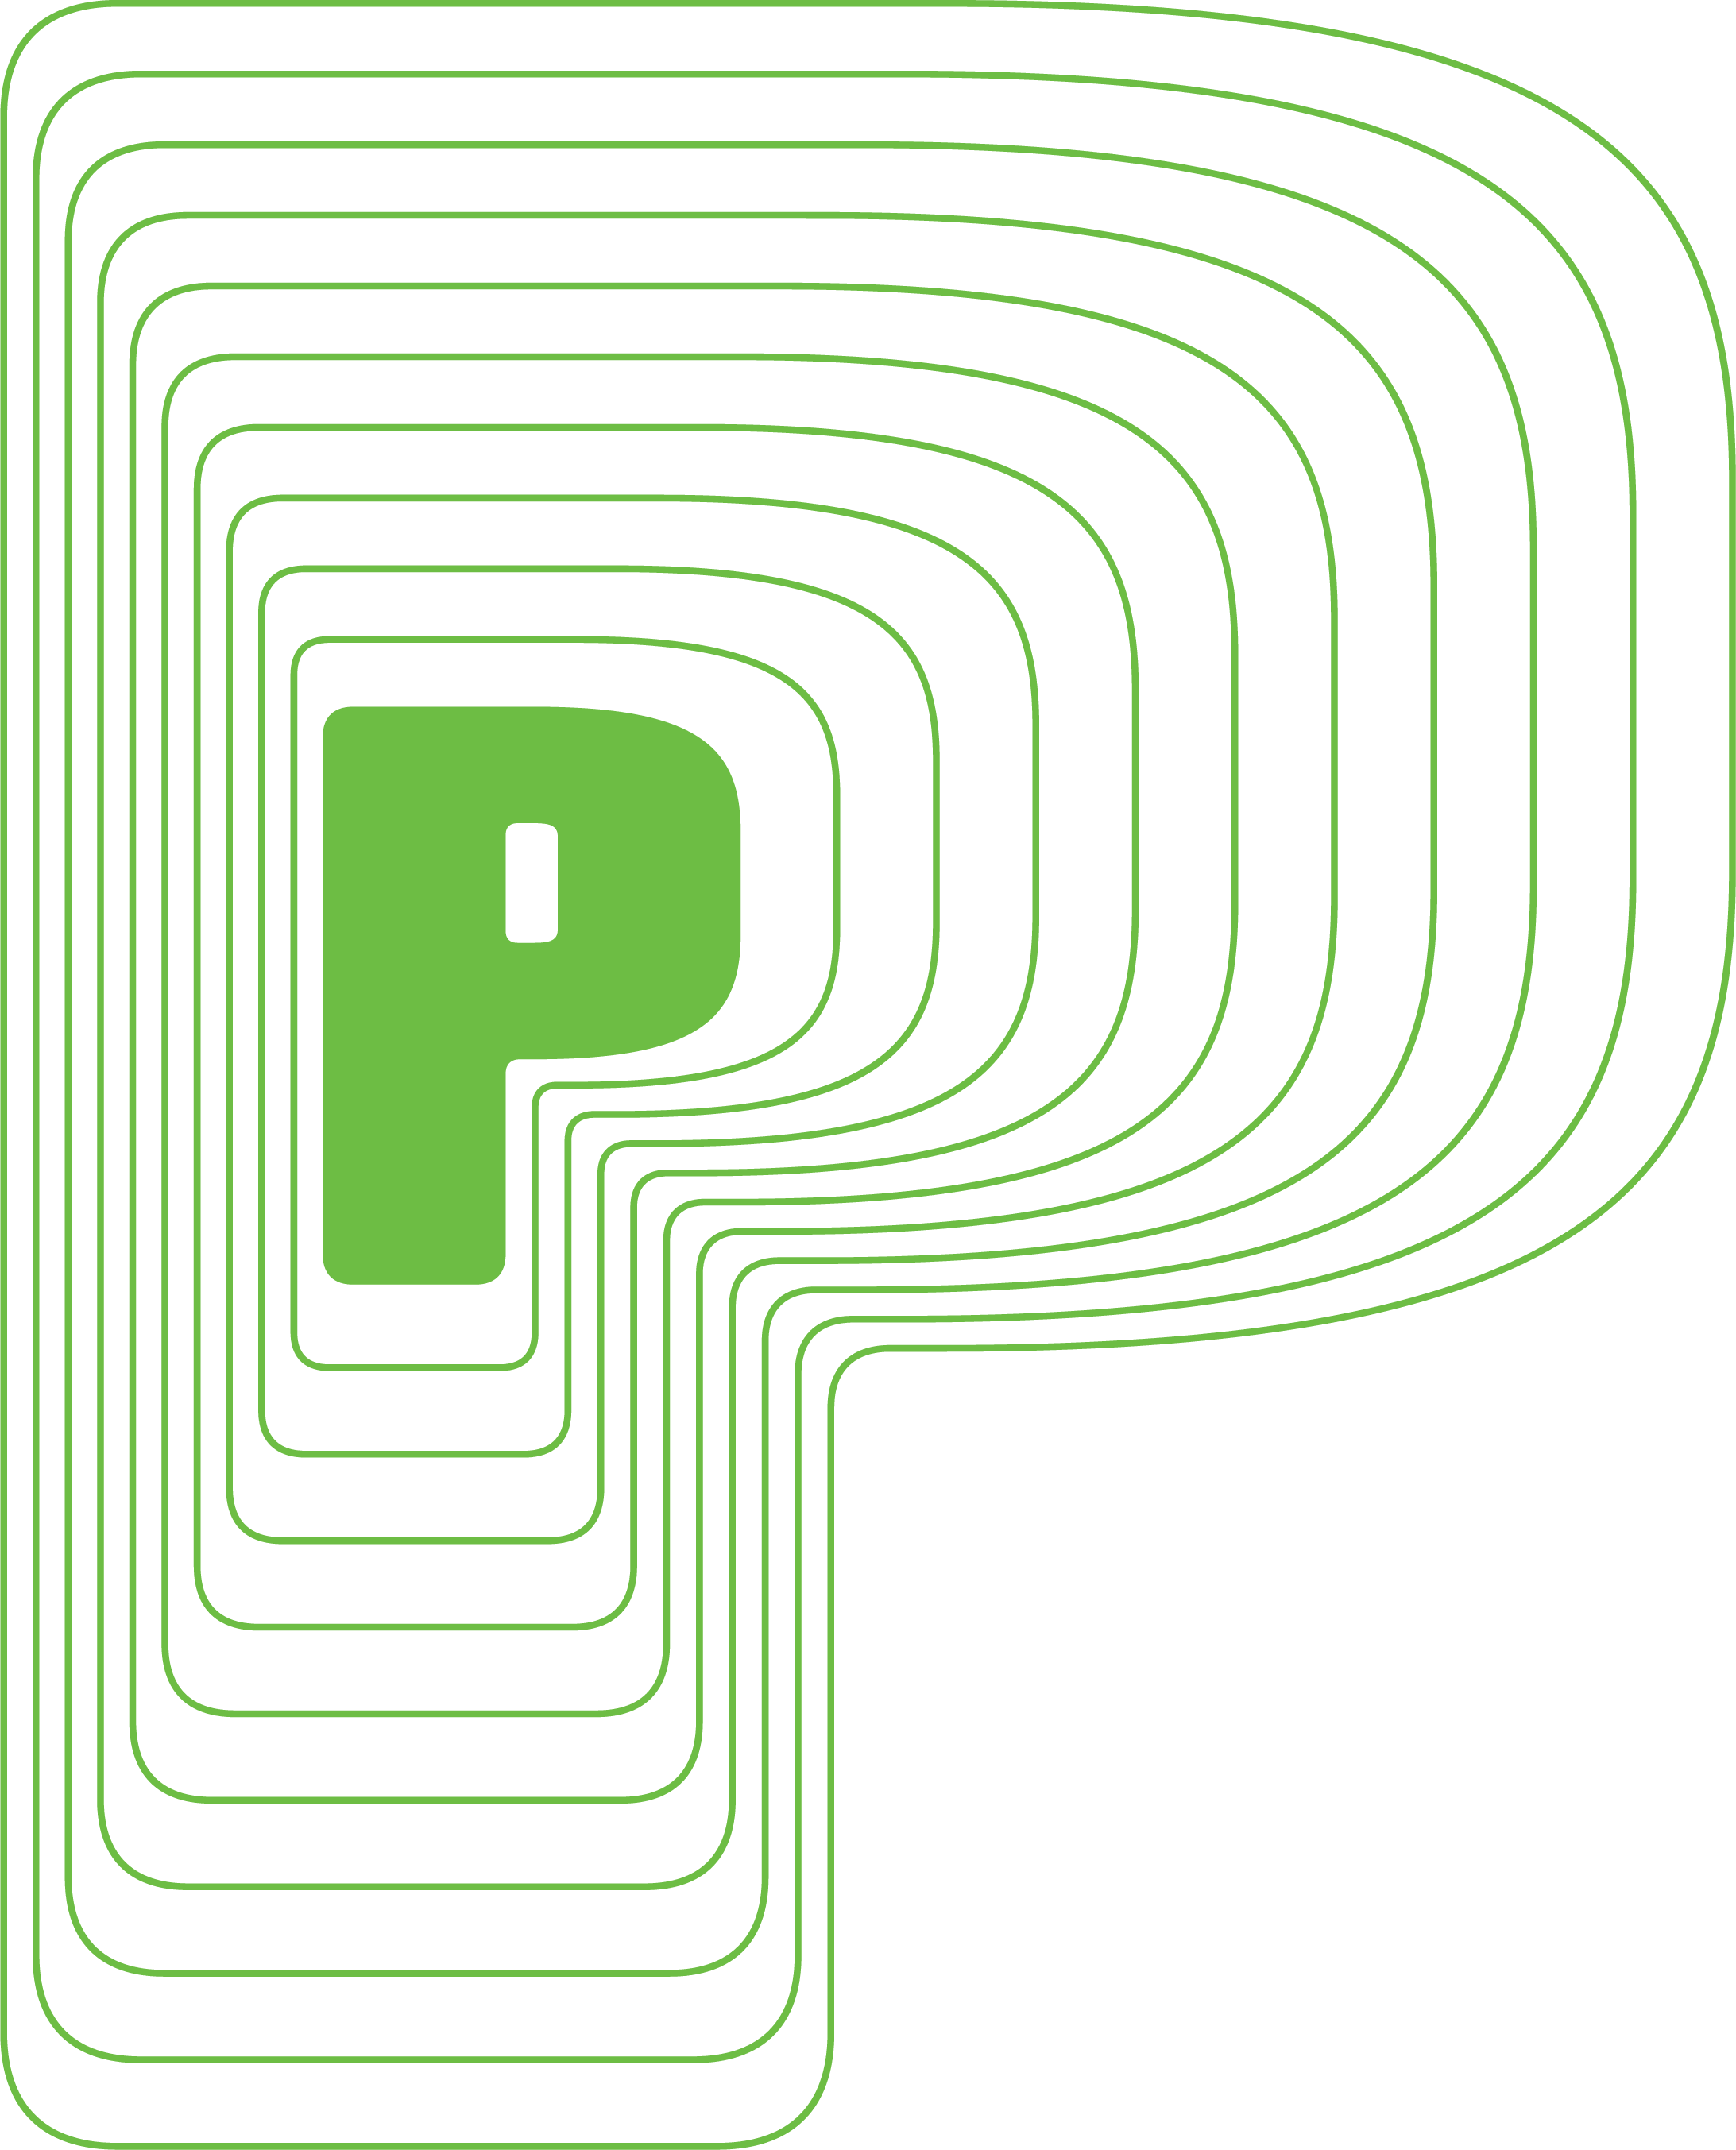 P_Solid-Center_Green